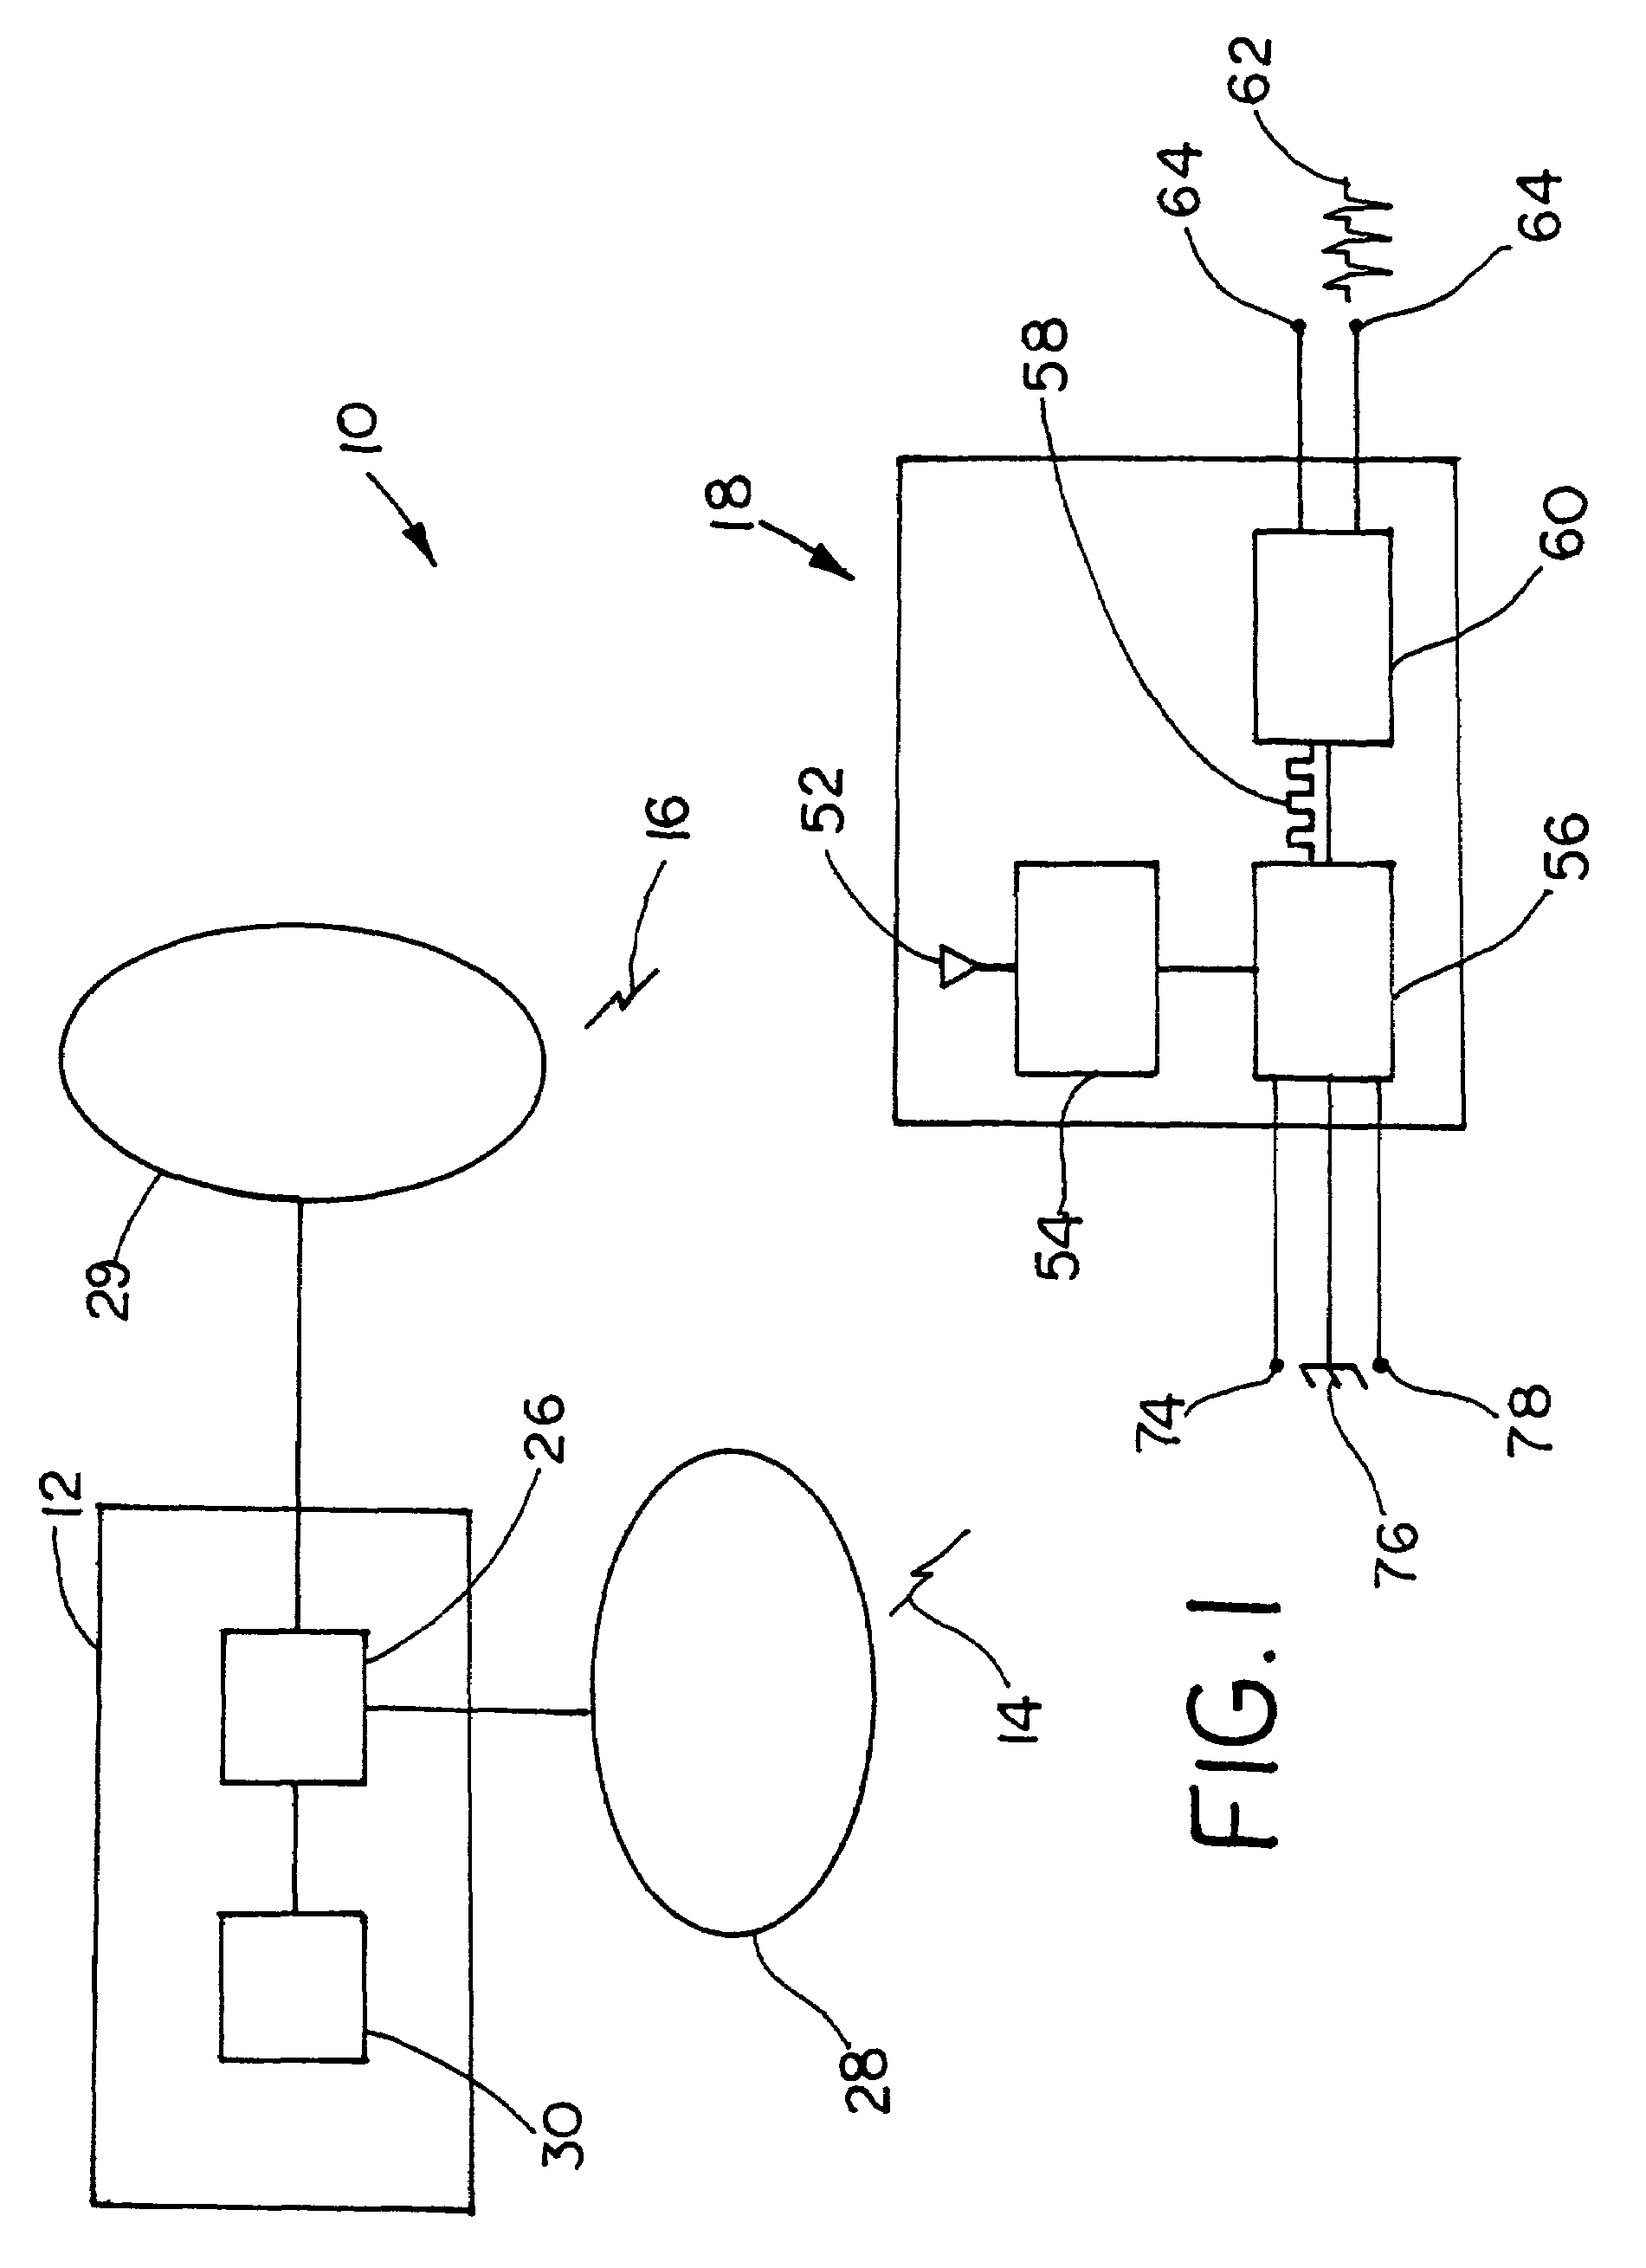 Animal training system with multiple configurable correction settings